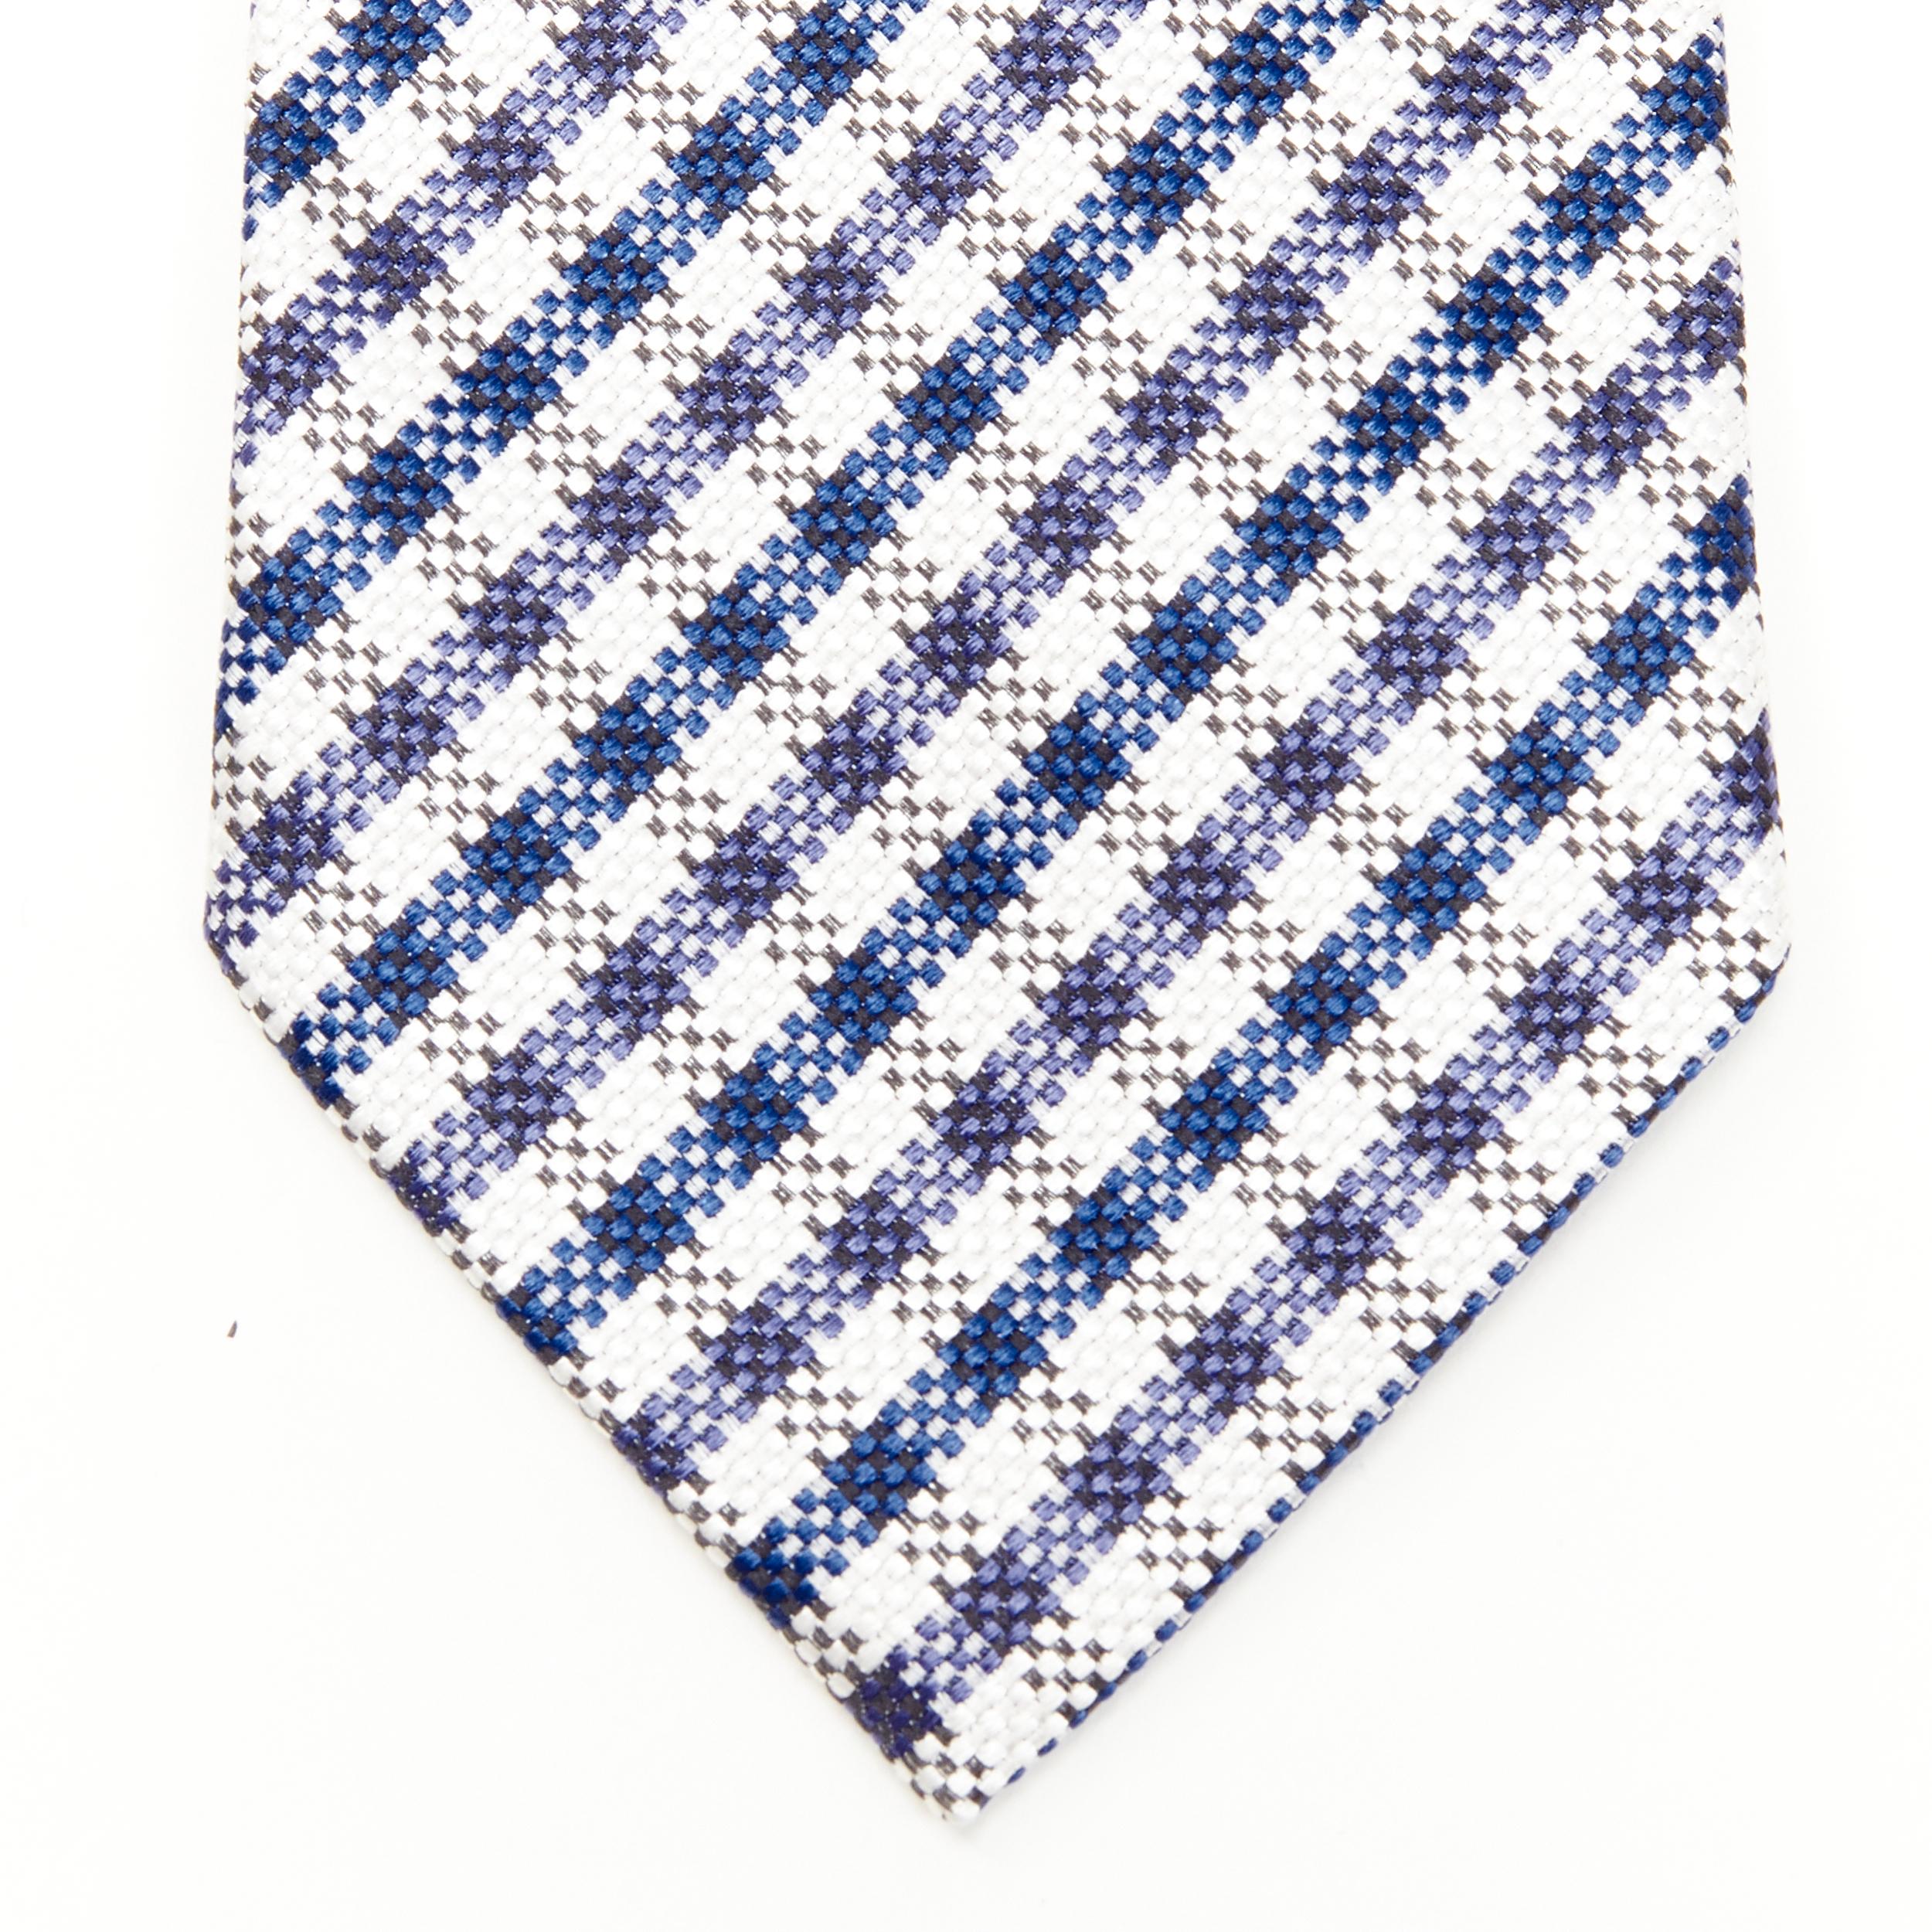 new TOM FORD 100% silk woven blue white checked tie 
Reference: JNWG/A00022 
Brand: Tom Ford 
Designer: Tom Ford 
Material: Silk 
Color: Blue 
Pattern: Check 
Estimated Retail Price: US $310 
Made in: Italy 

CONDITION: 
Condition: New with tags.